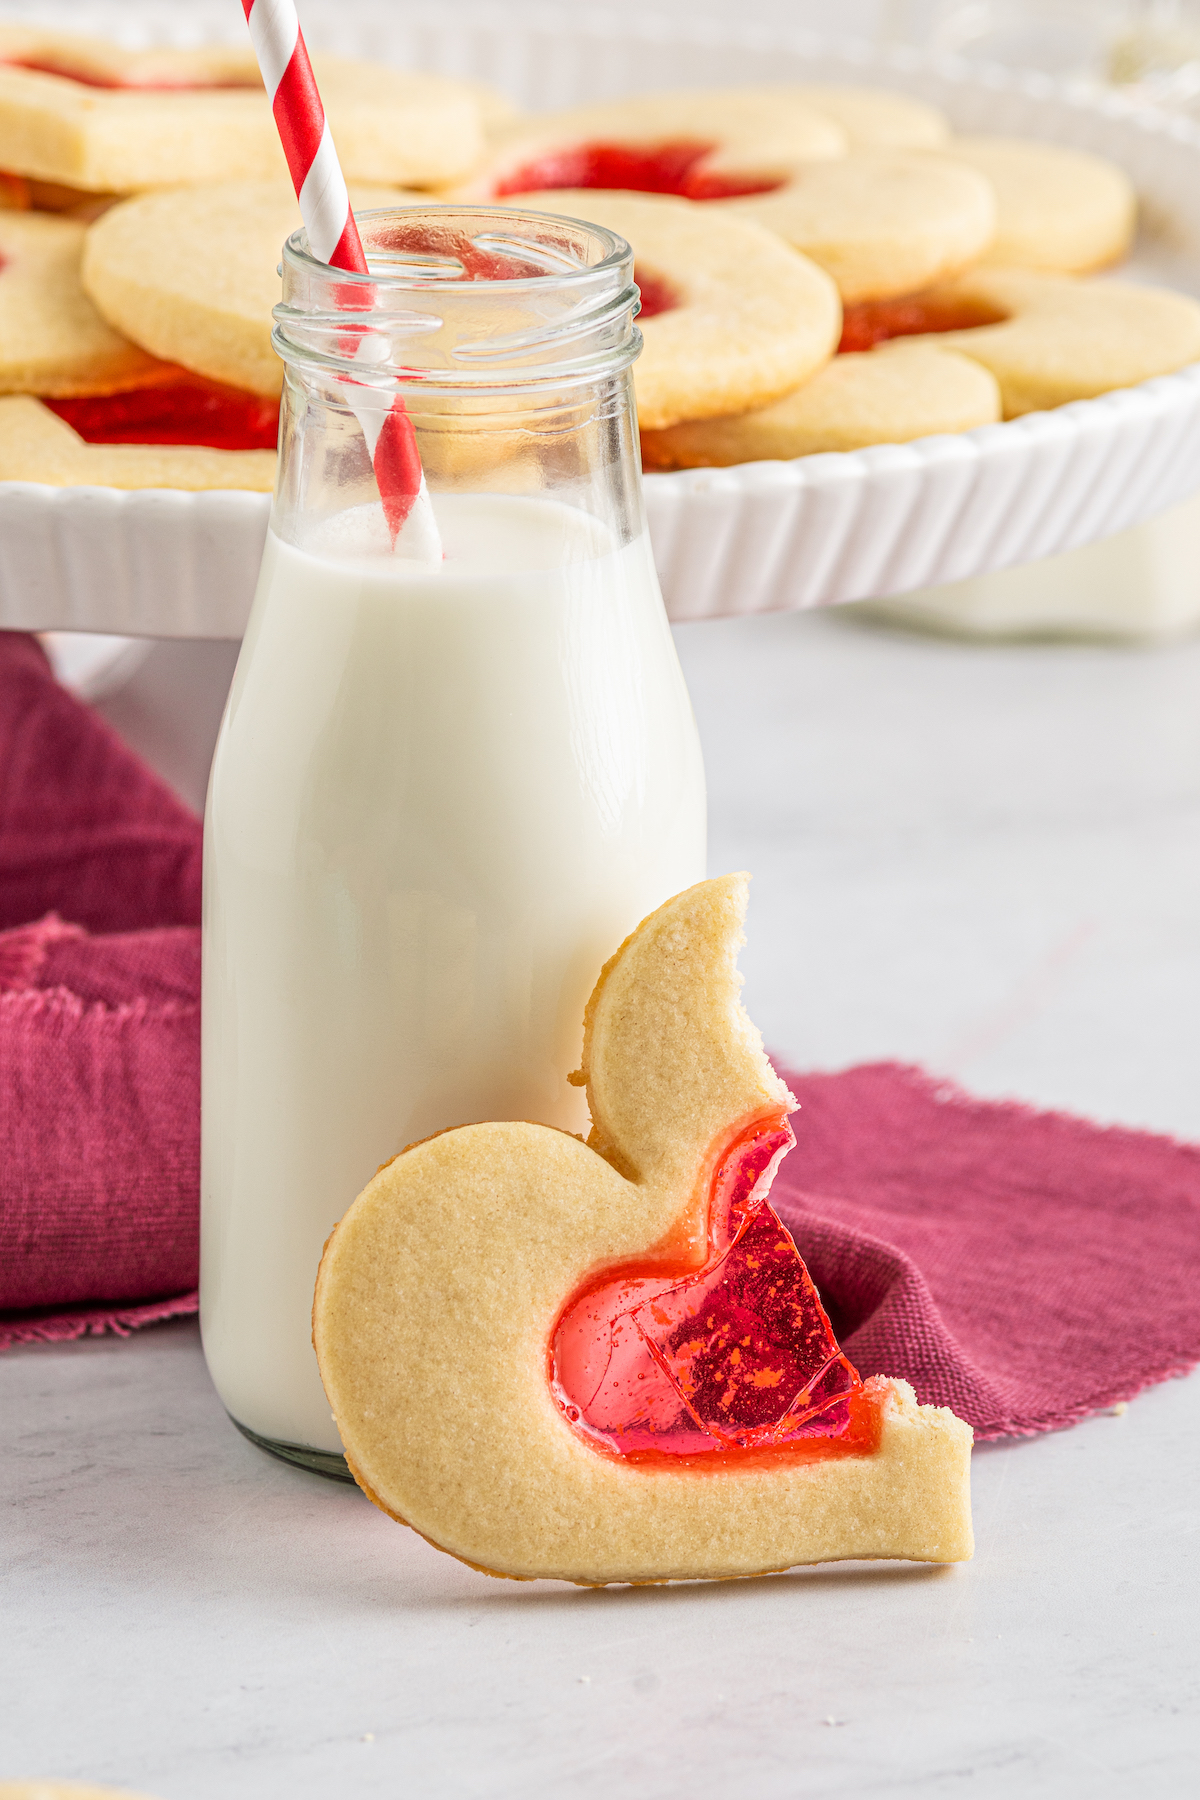 A heart-shaped cookie leaning against a bottle of milk with a straw. The cookie has been broken in half to show texture.